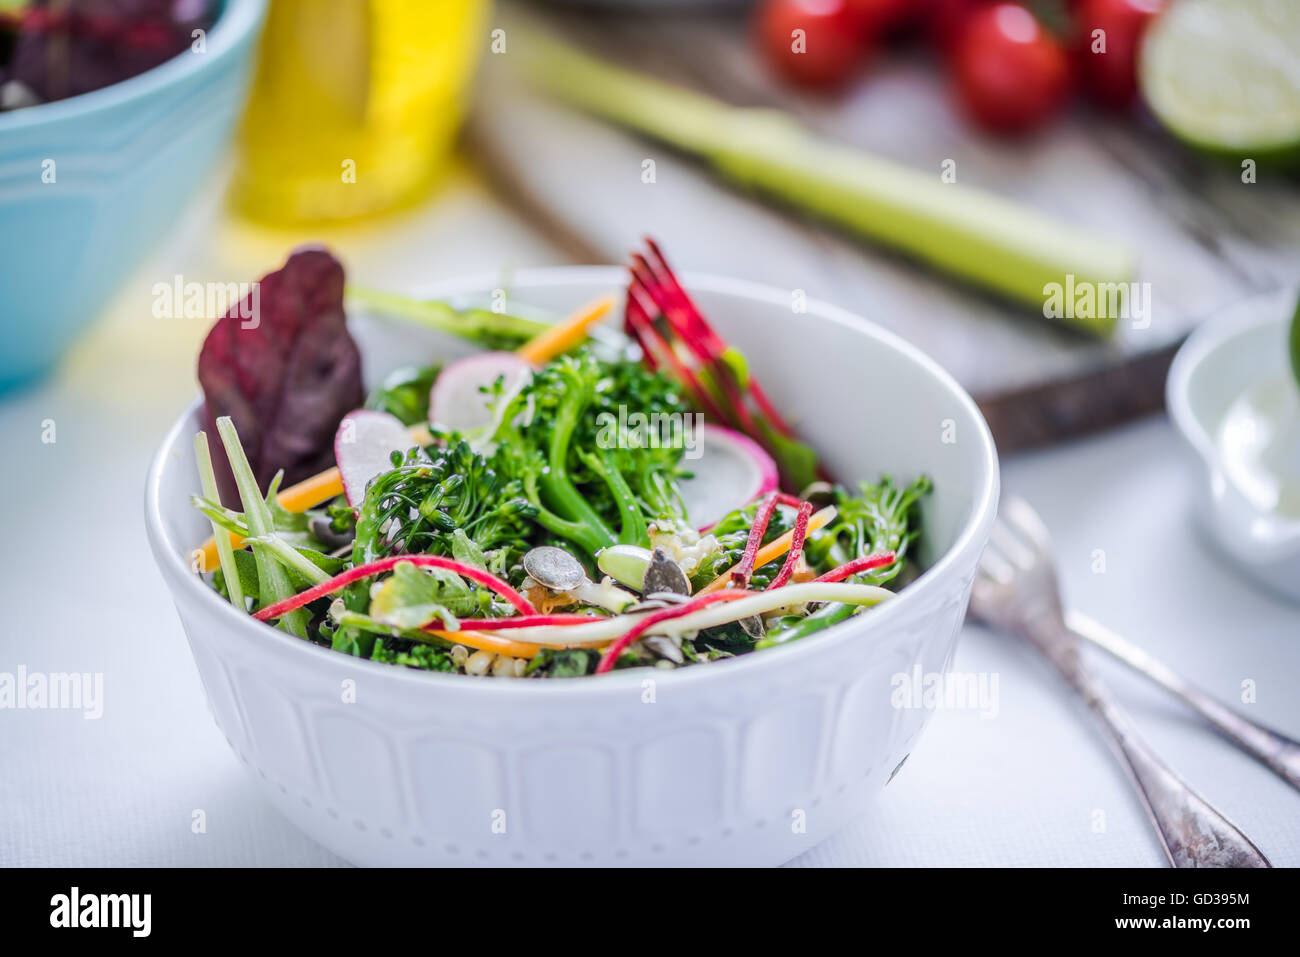 vibrant crunchy salad in bowl on bright cloth Stock Photo